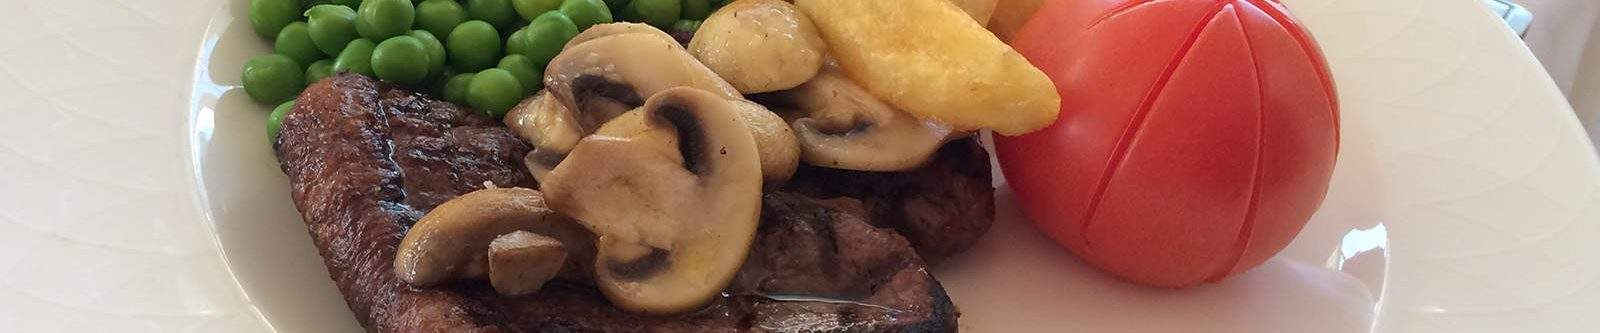 steak and chips with mushrooms, peas and tomato